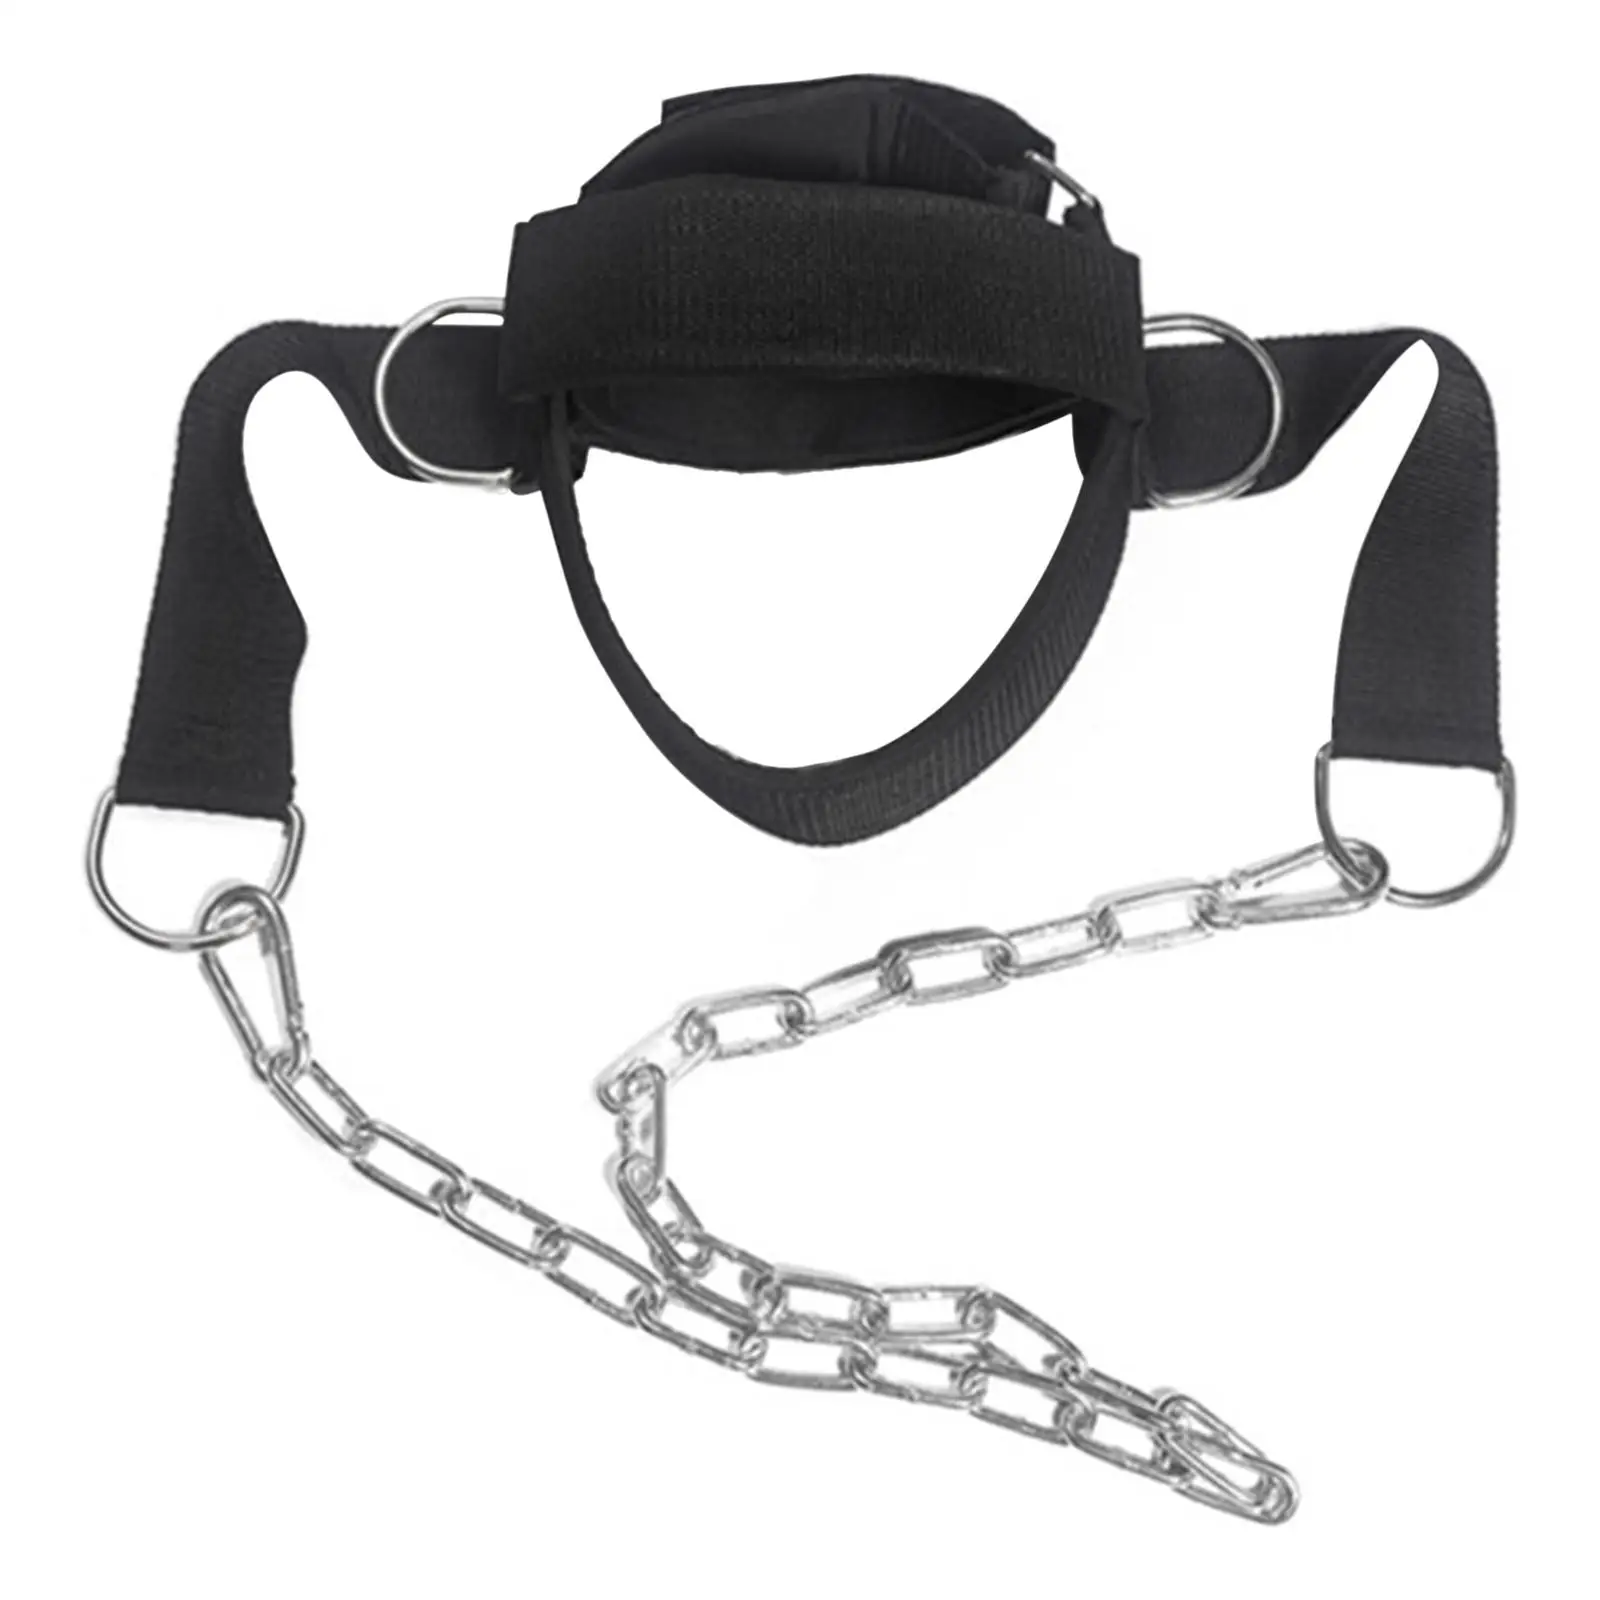 1 Piece Head Neck Harness Strengh Exercise Strap for Weight Lifting Fitness Training